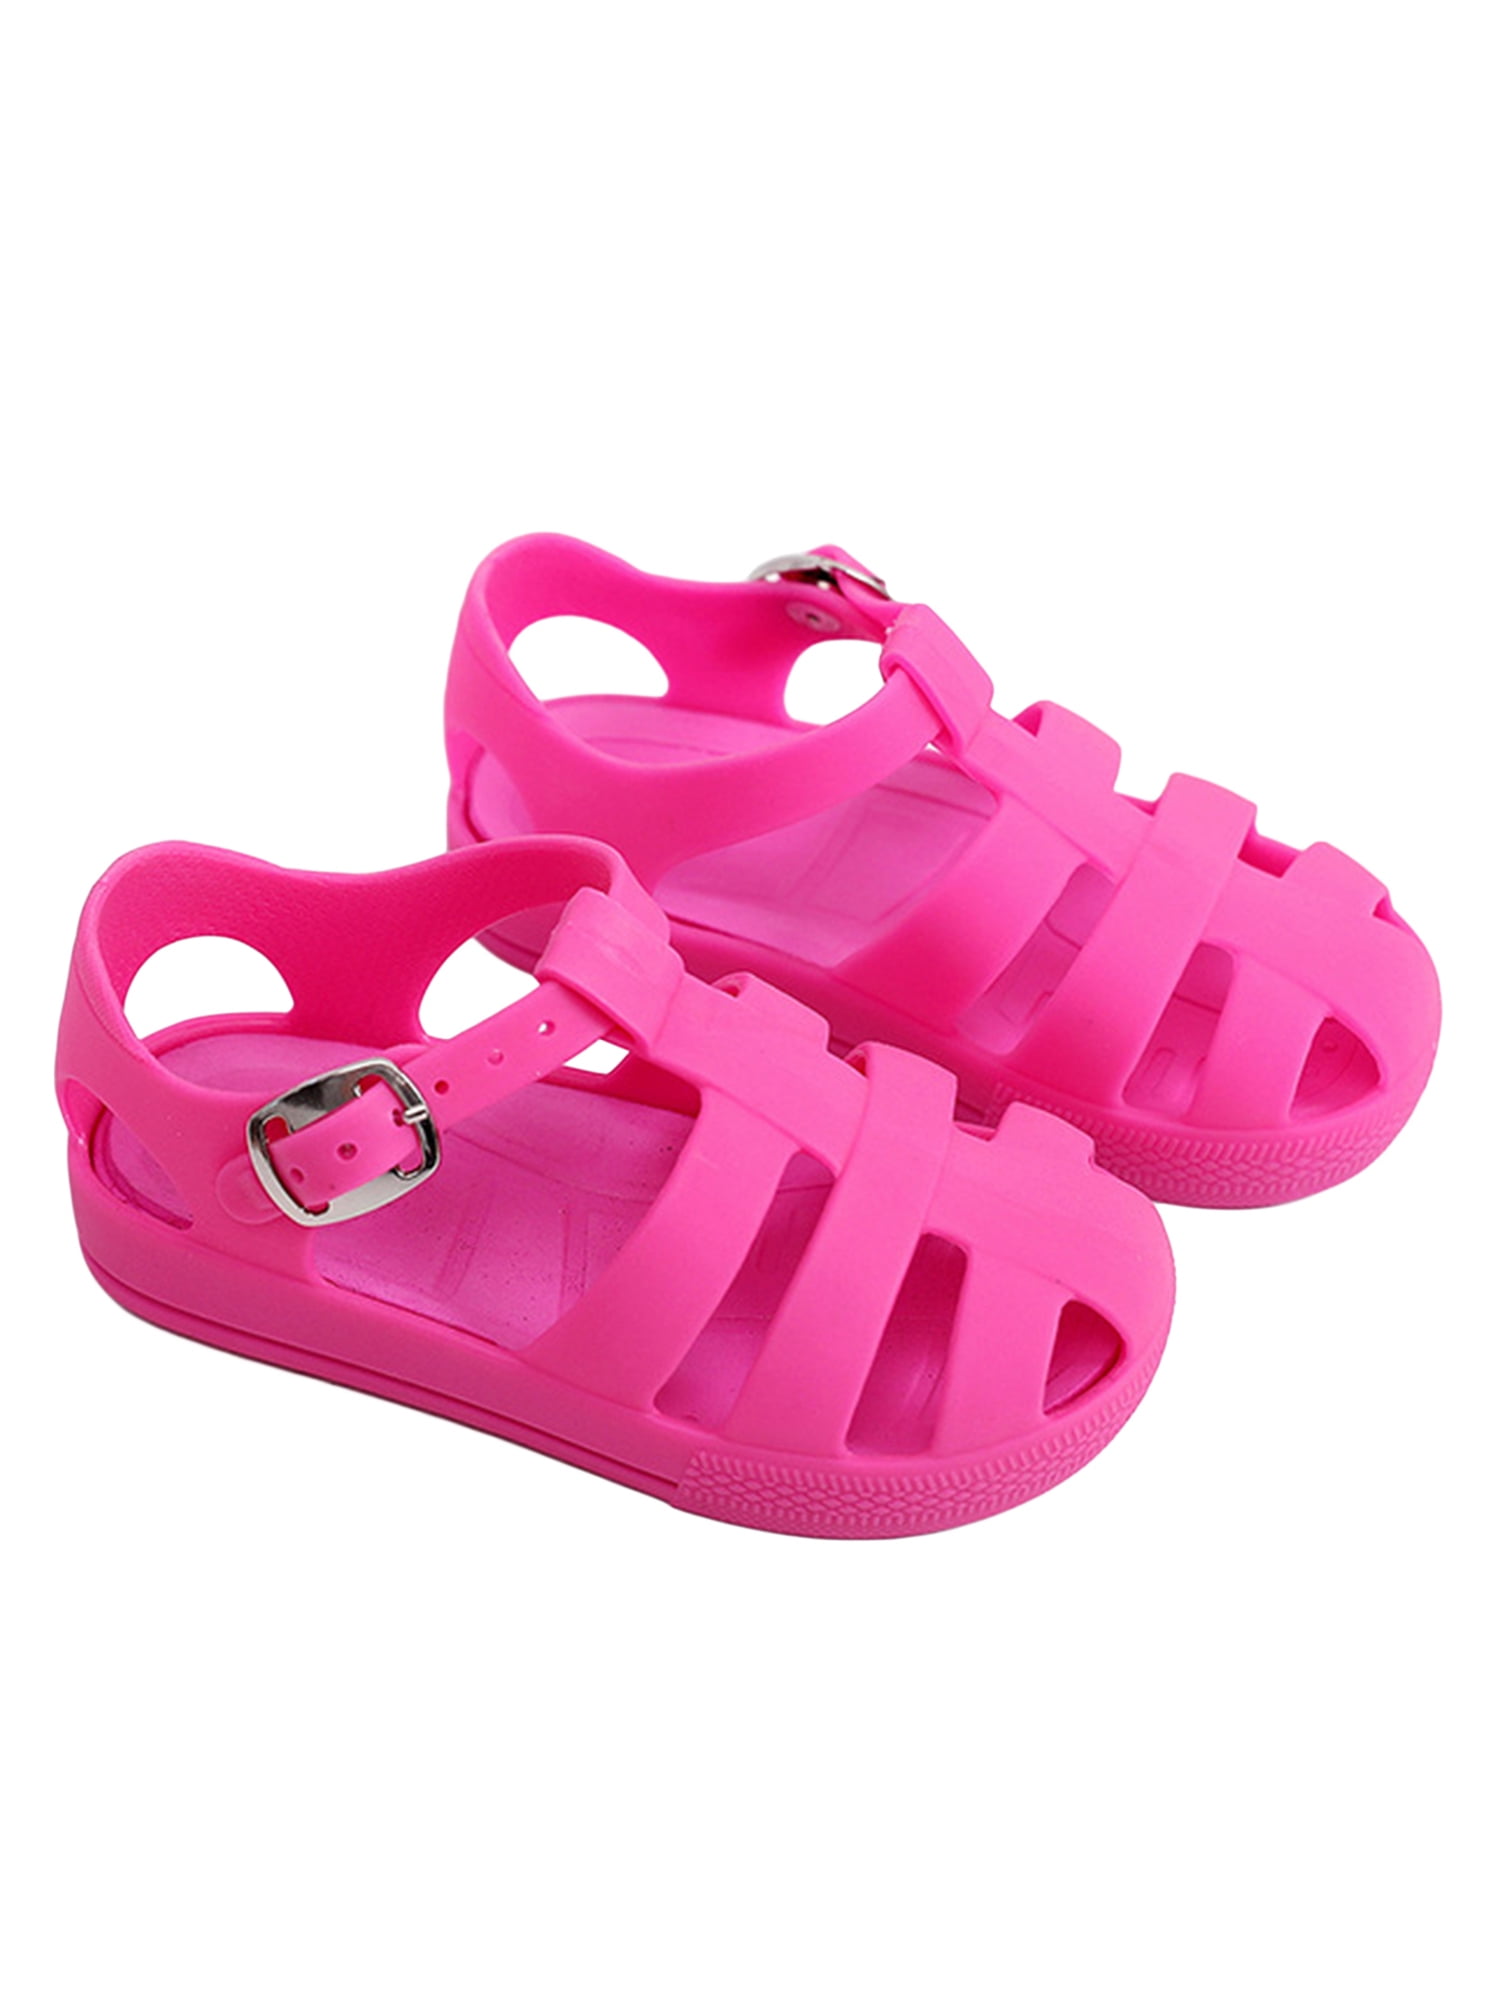 Baby Kids Boys Girls Fashion Anti-Slip Sneaker Shoes Summer Casual Sandals Shoes 